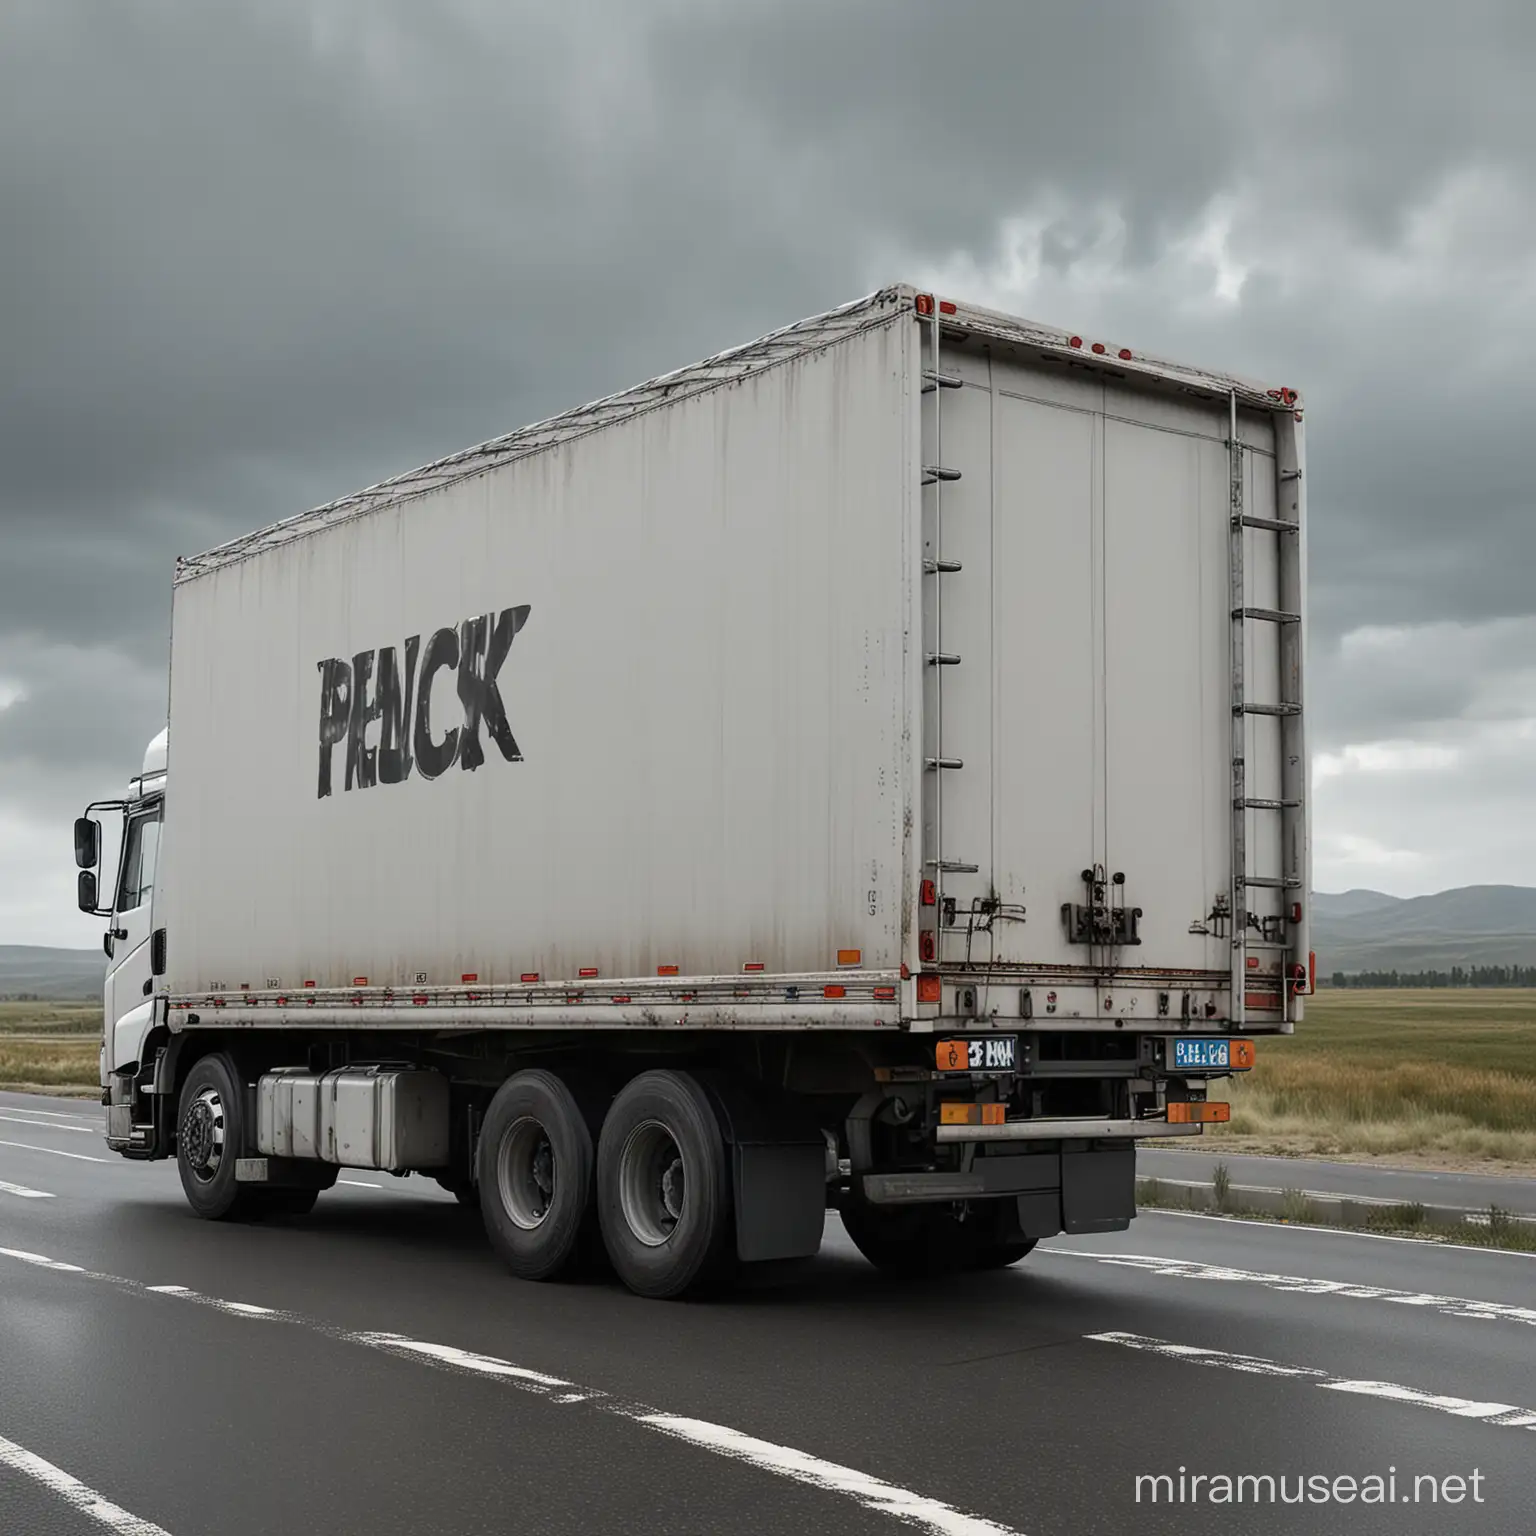 Realistic Truck Back with Blank Billboard on Highway Background